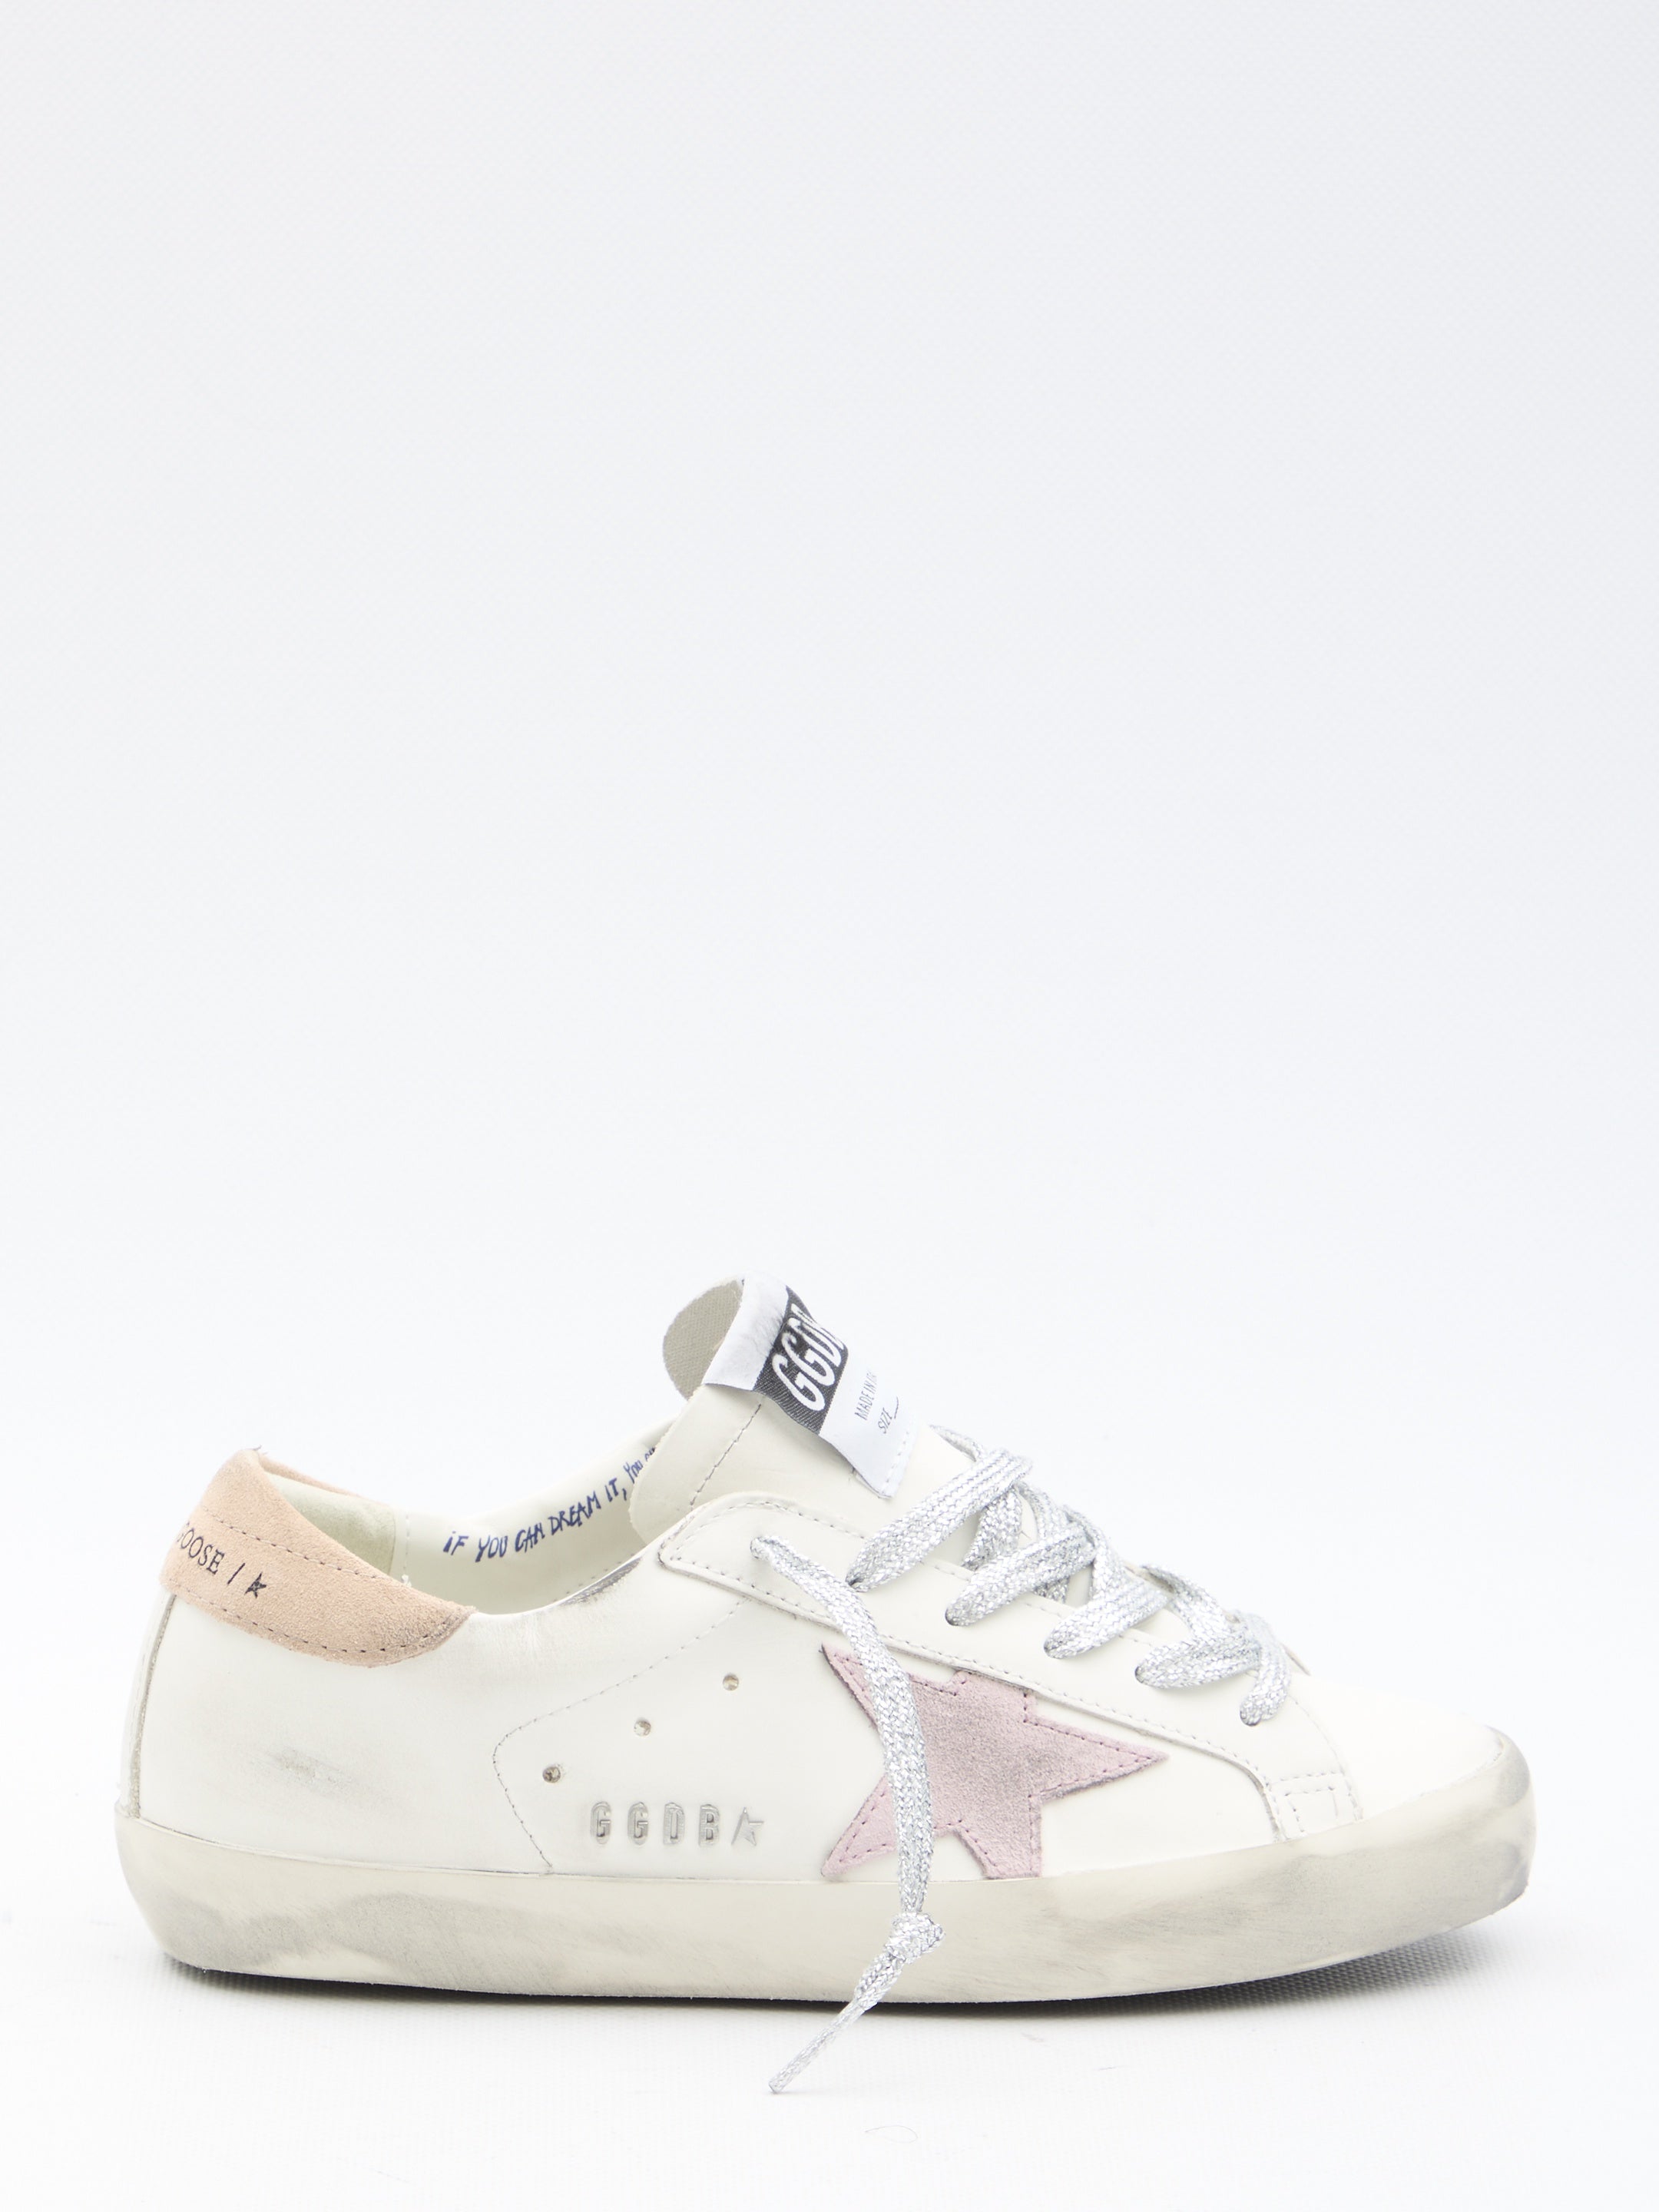 GOLDEN-GOOSE-OUTLET-SALE-Super-Star-sneakers-Sneakers-37-WHITE-ARCHIVE-COLLECTION.jpg